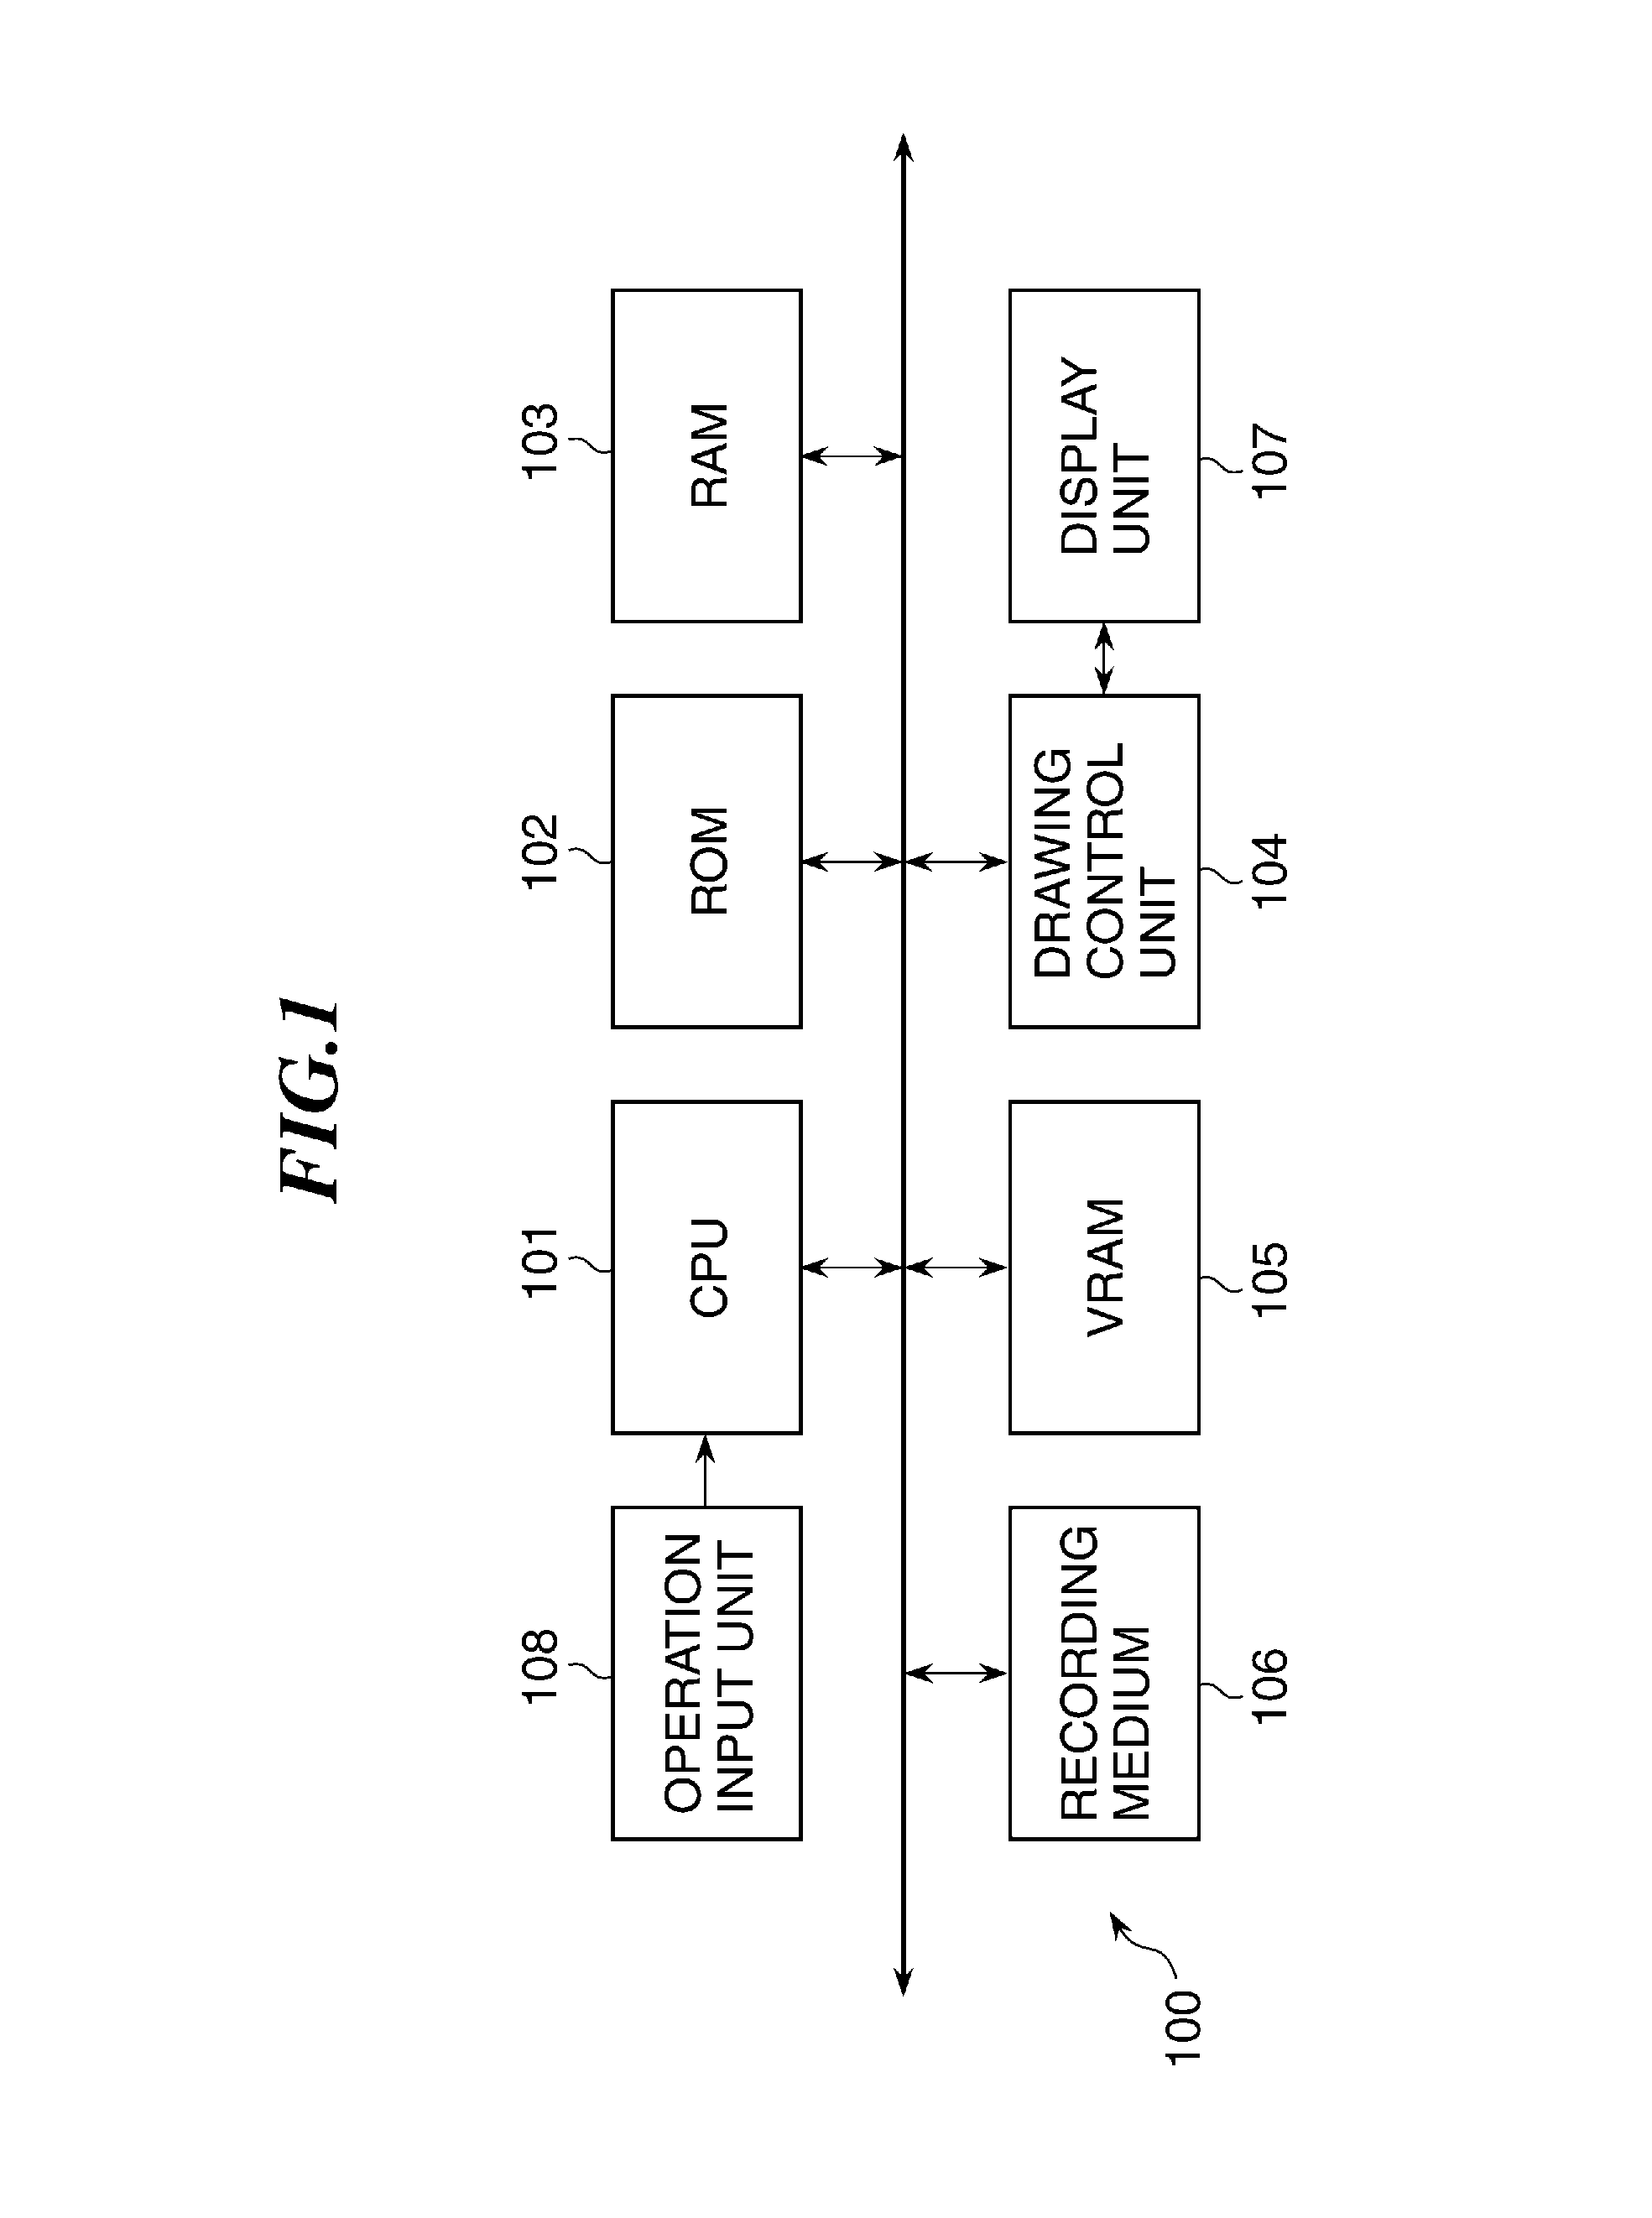 Display control apparatus capable of placing objects on screen according to position attributes of the objects, control method therefor, and storage medium